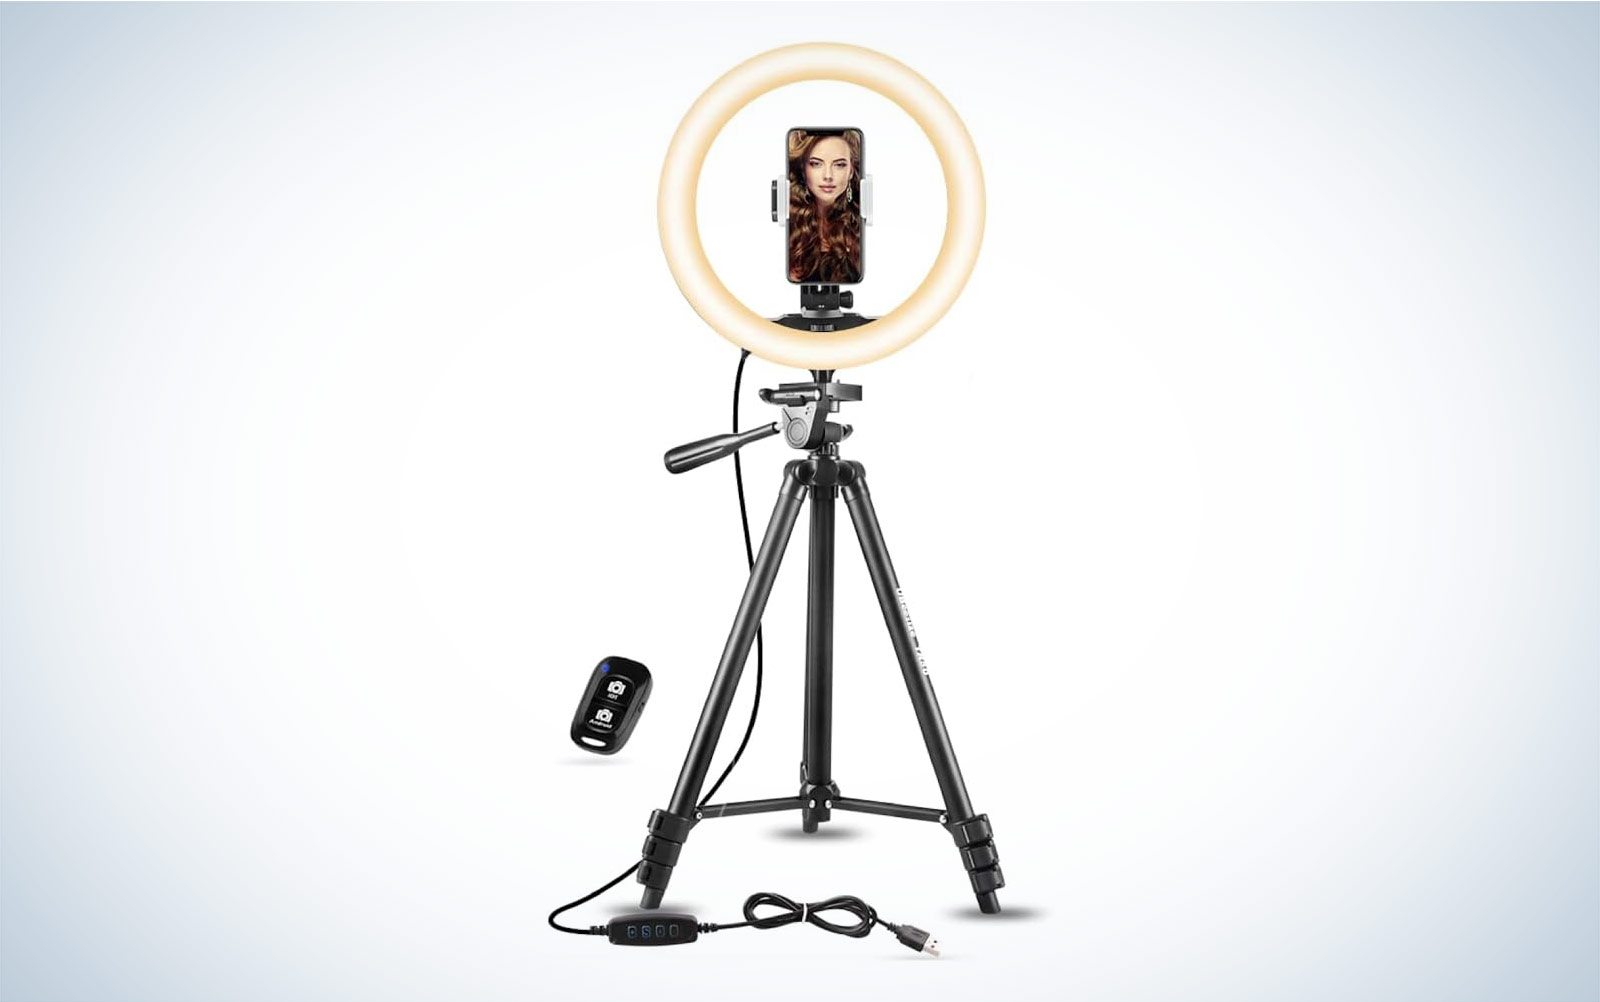 Buy HOLD UP Selfie Ring Light with Tripod Stand & Phone Holder Battery,  Rechargeable versionLED Dimmable Ring Light for Live Stream/Makeup/YouTube  Video/Photography, Compatible with iOS/Android Online at Low Prices in  India -